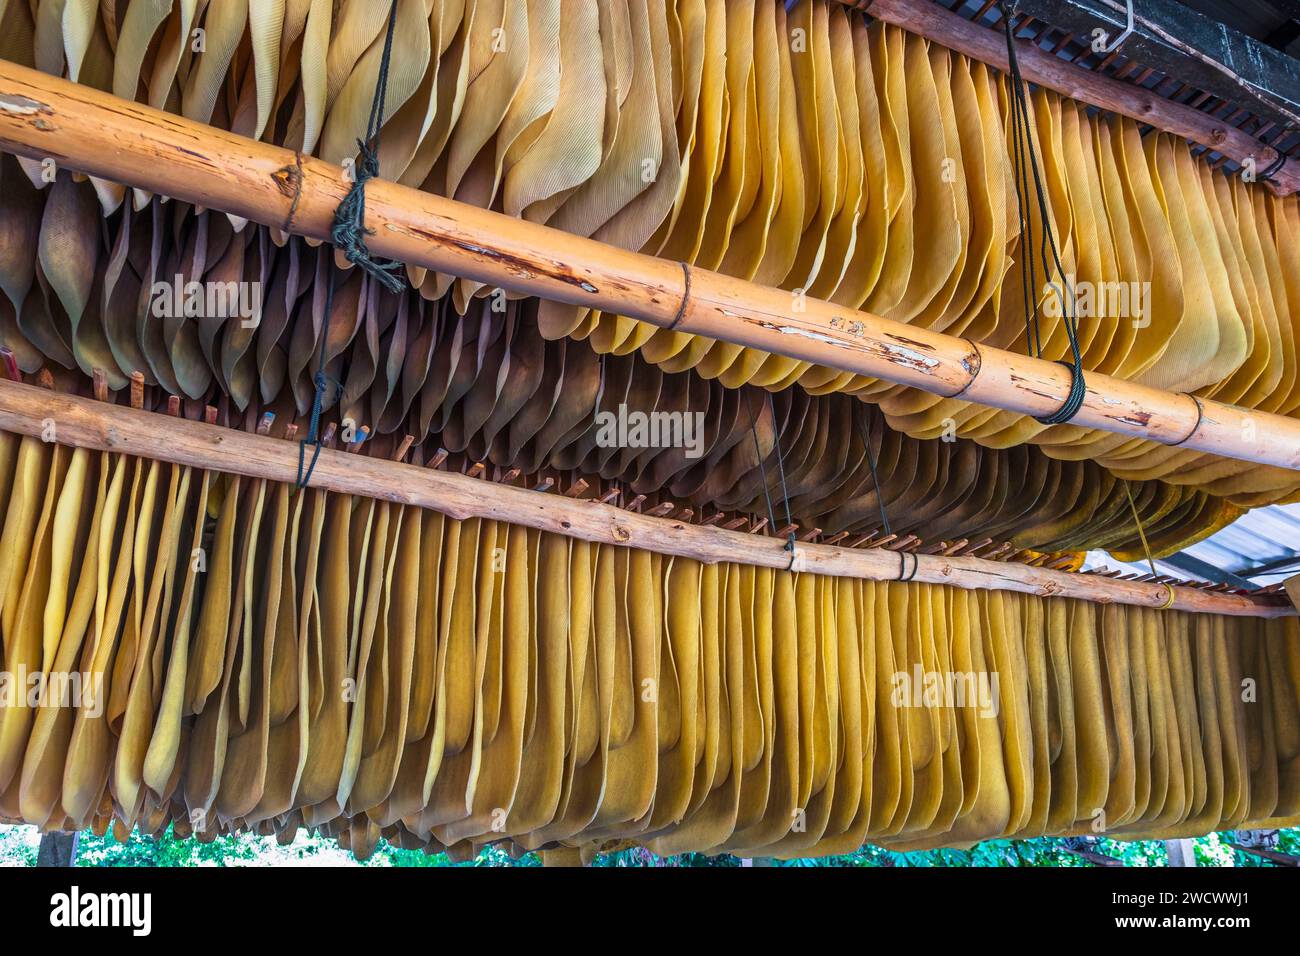 Thailand, Trat province, Ko Mak island, rubber cultivation, drying latex Stock Photo